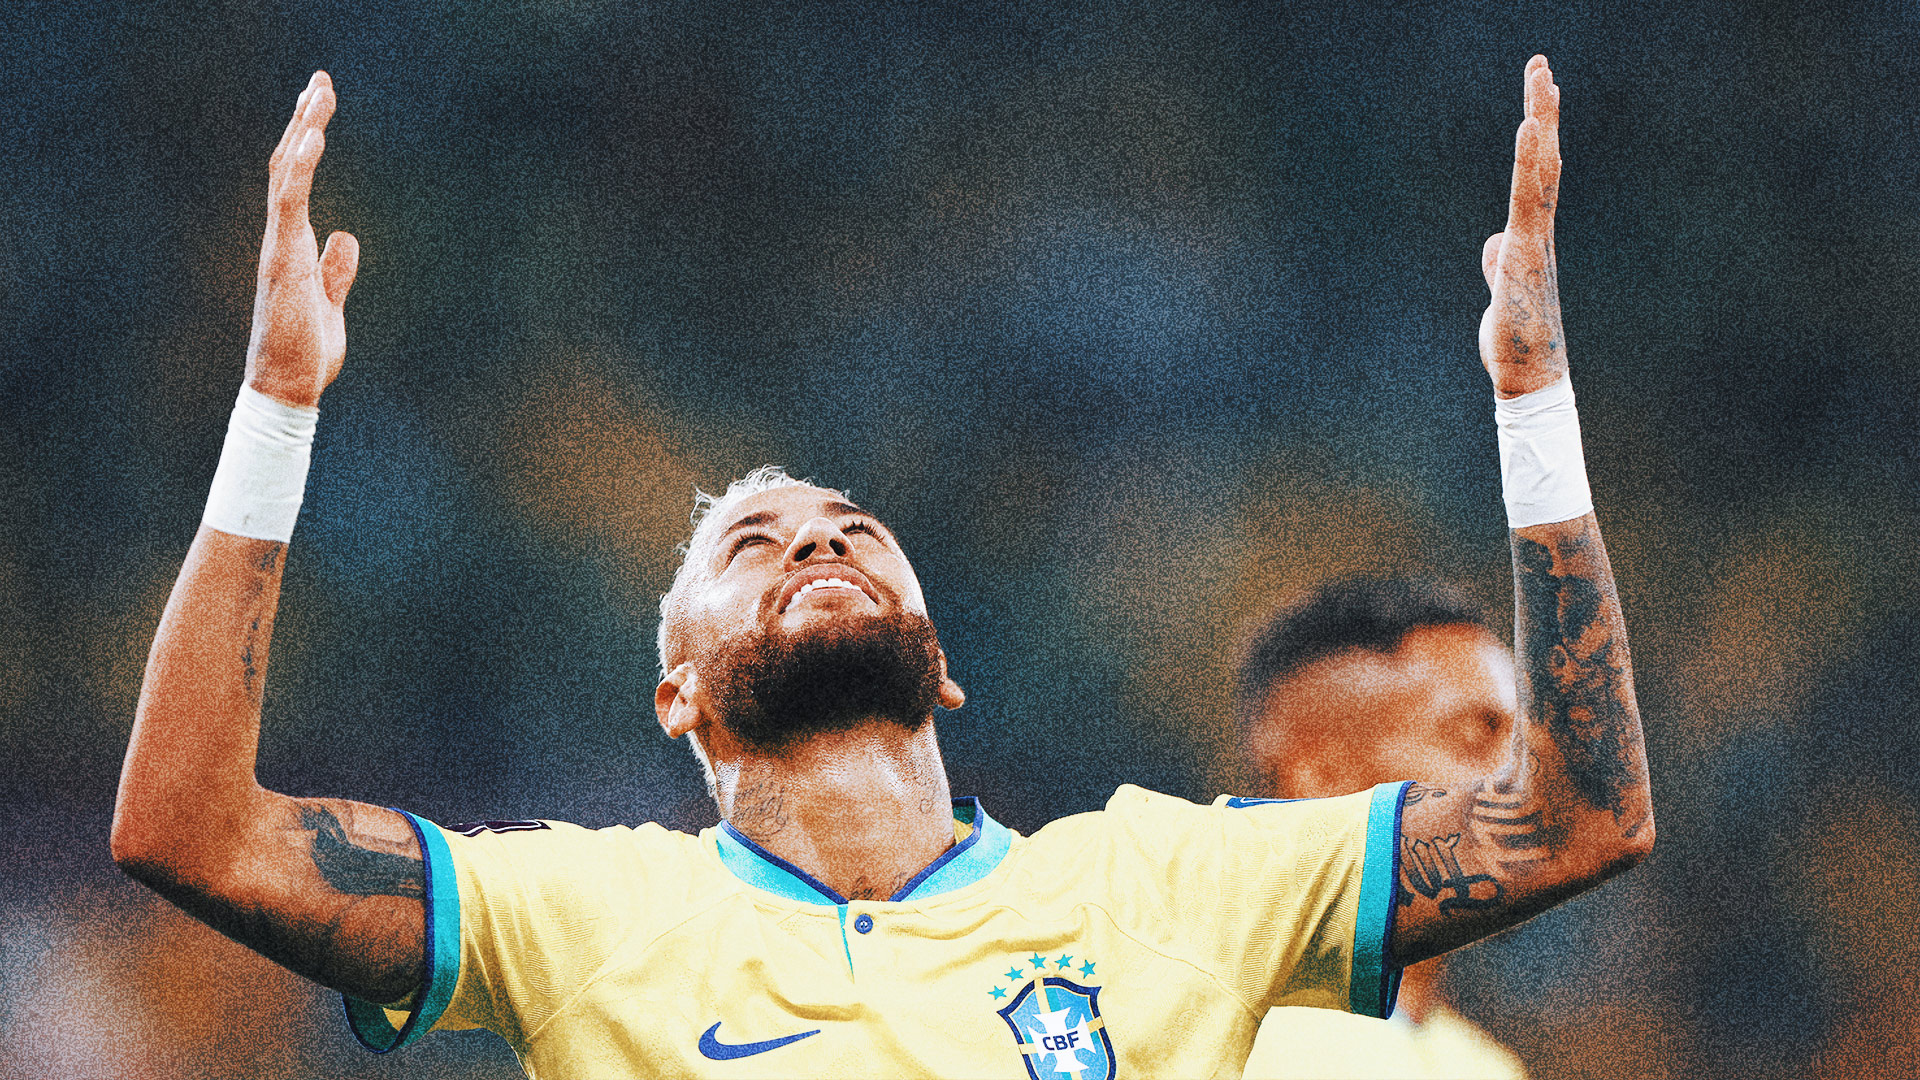 With Neymar back and feeling good, Brazil as dangerous as ever